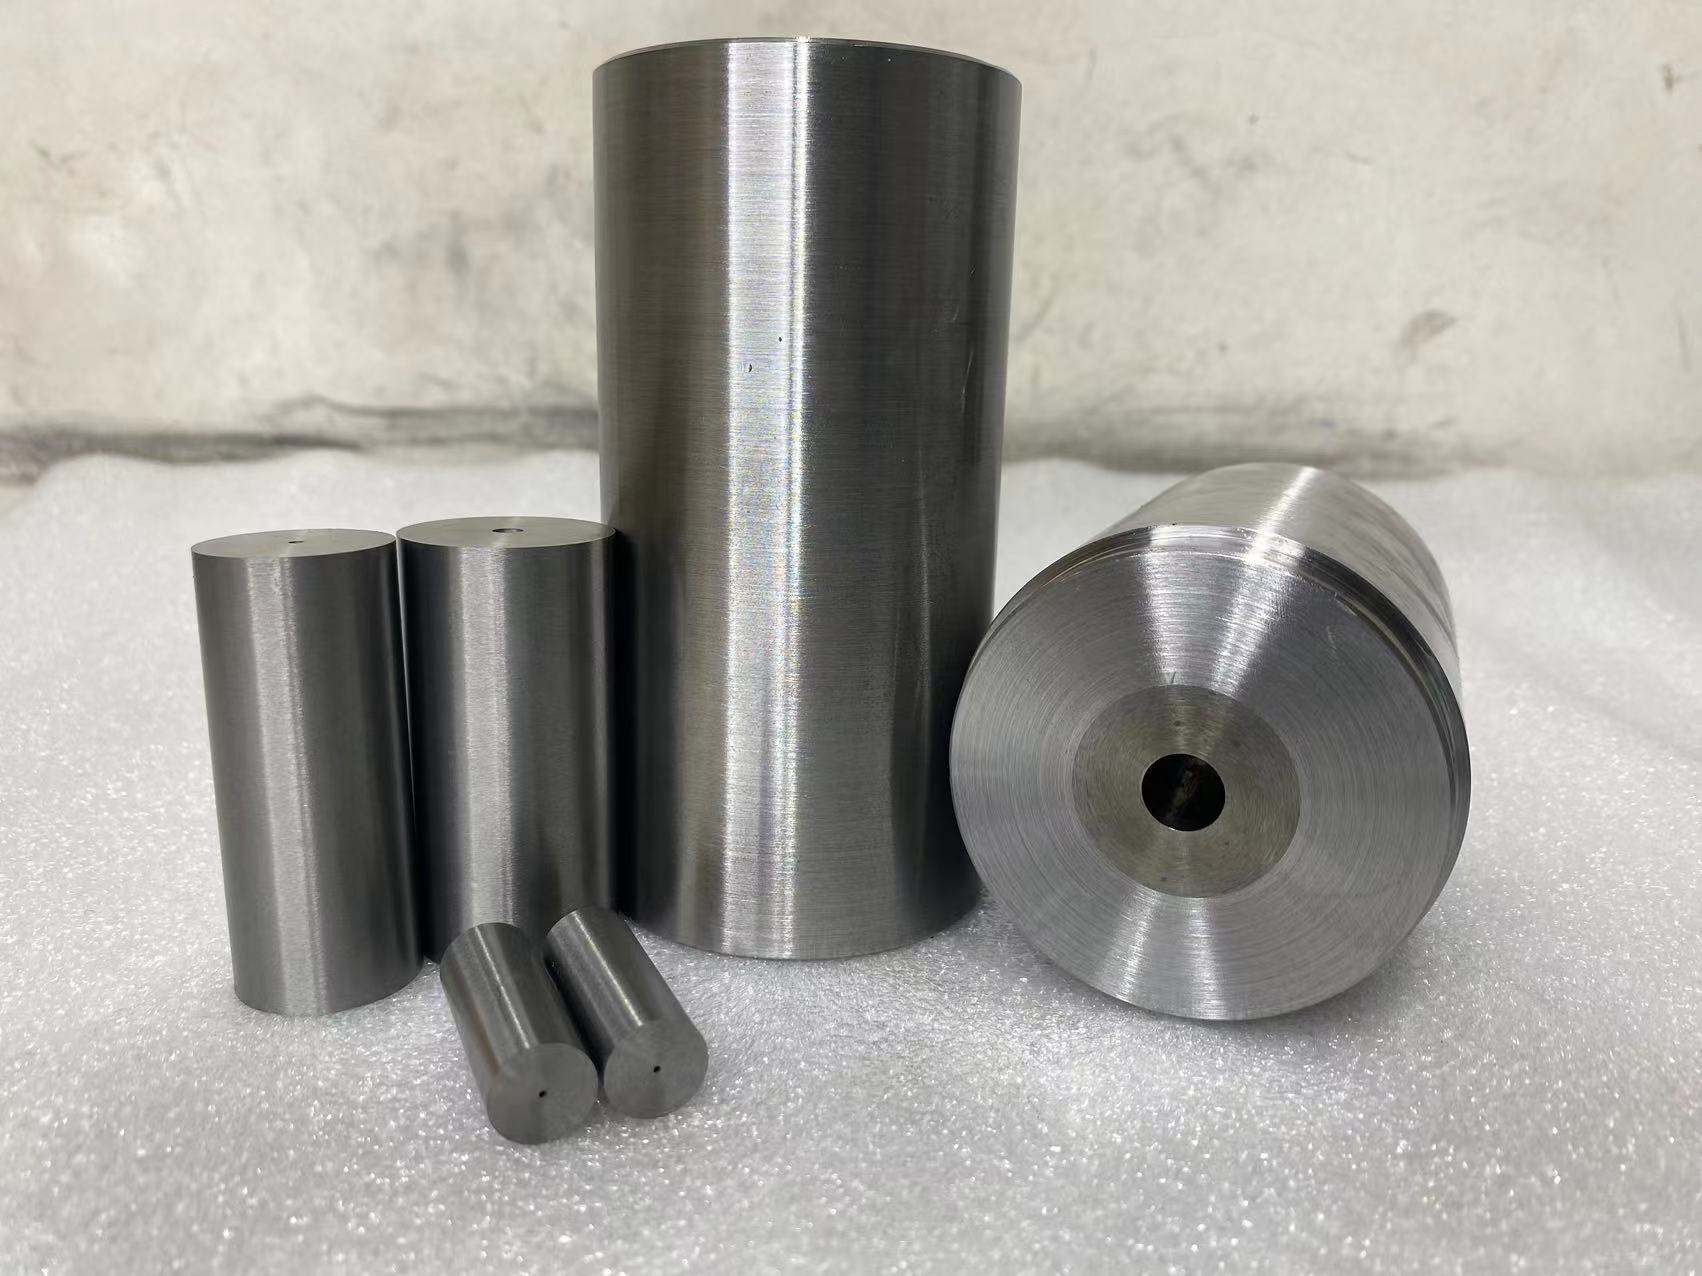 What are tungsten carbide dies for?